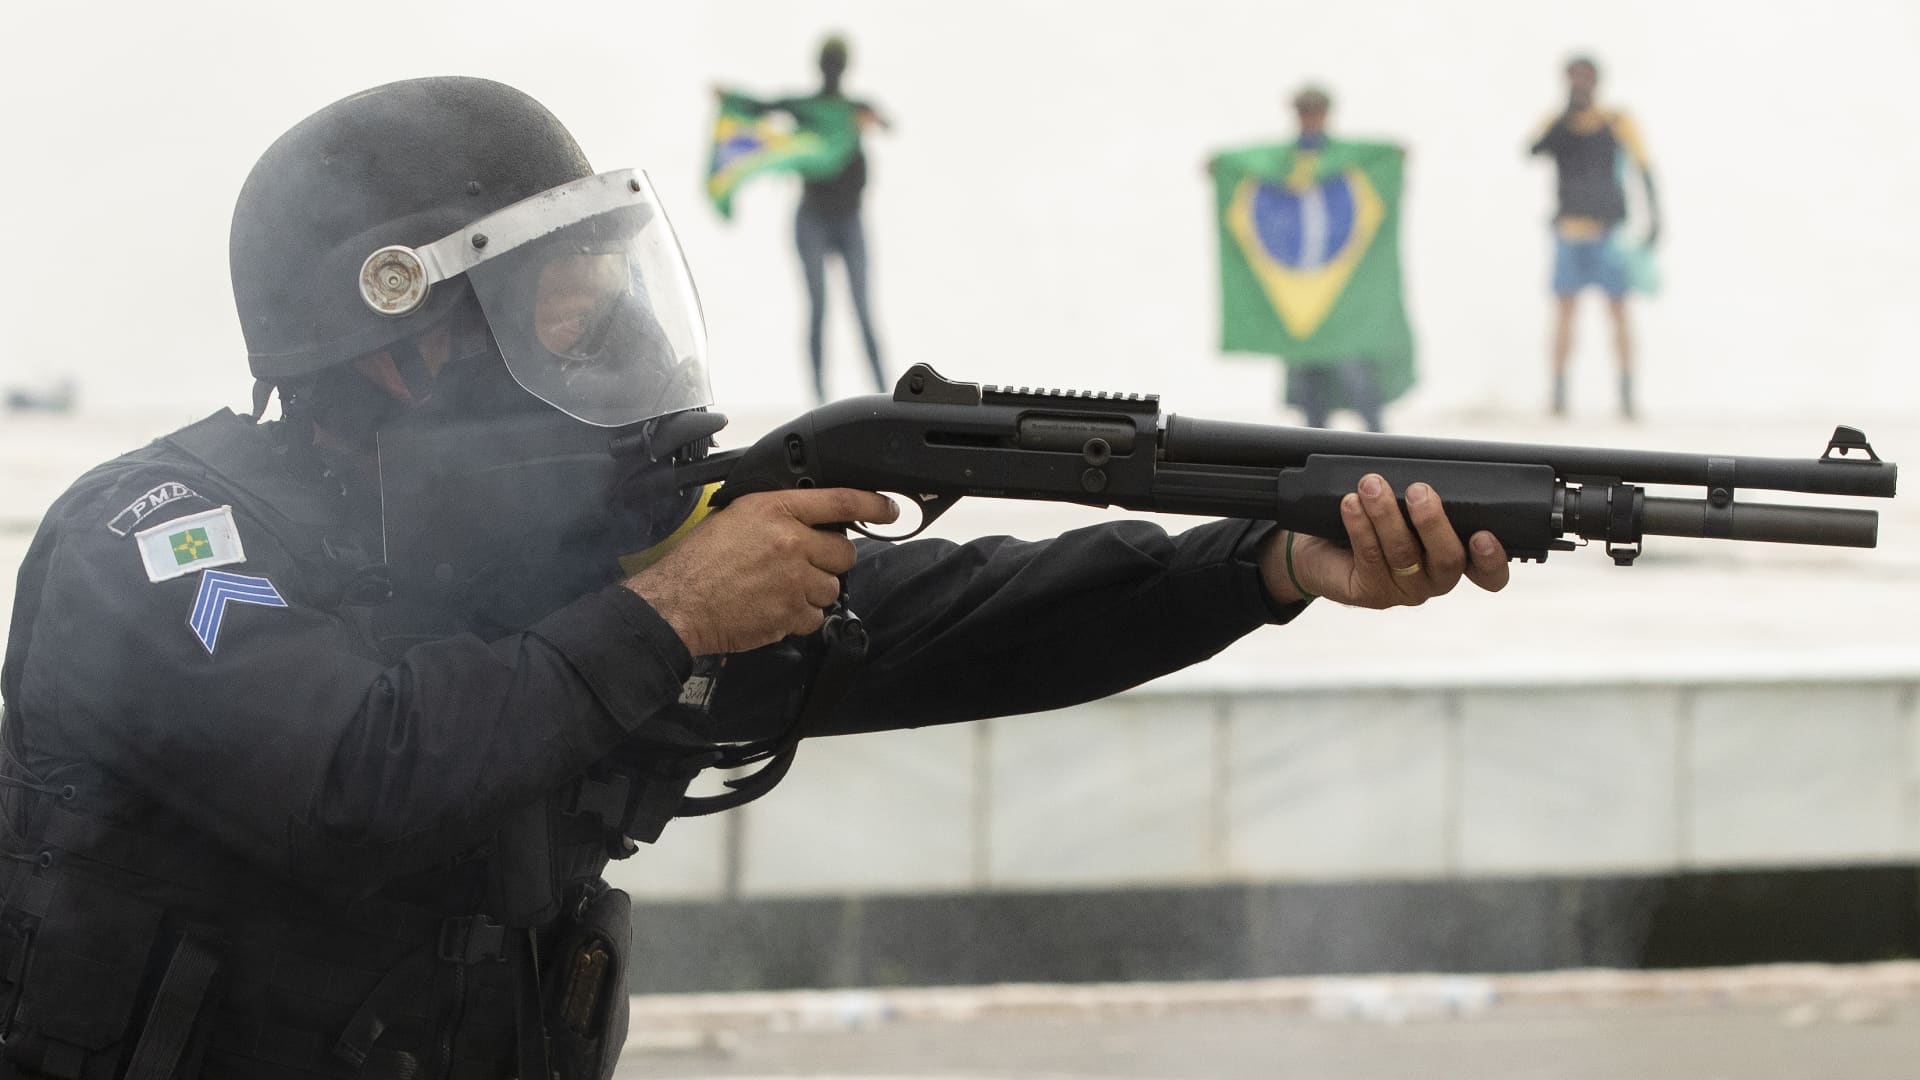 Supporters of former President Jair Bolsonaro clash with security forces as they raid the National Congress in Brasilia, Brazil, 08 January 2023.